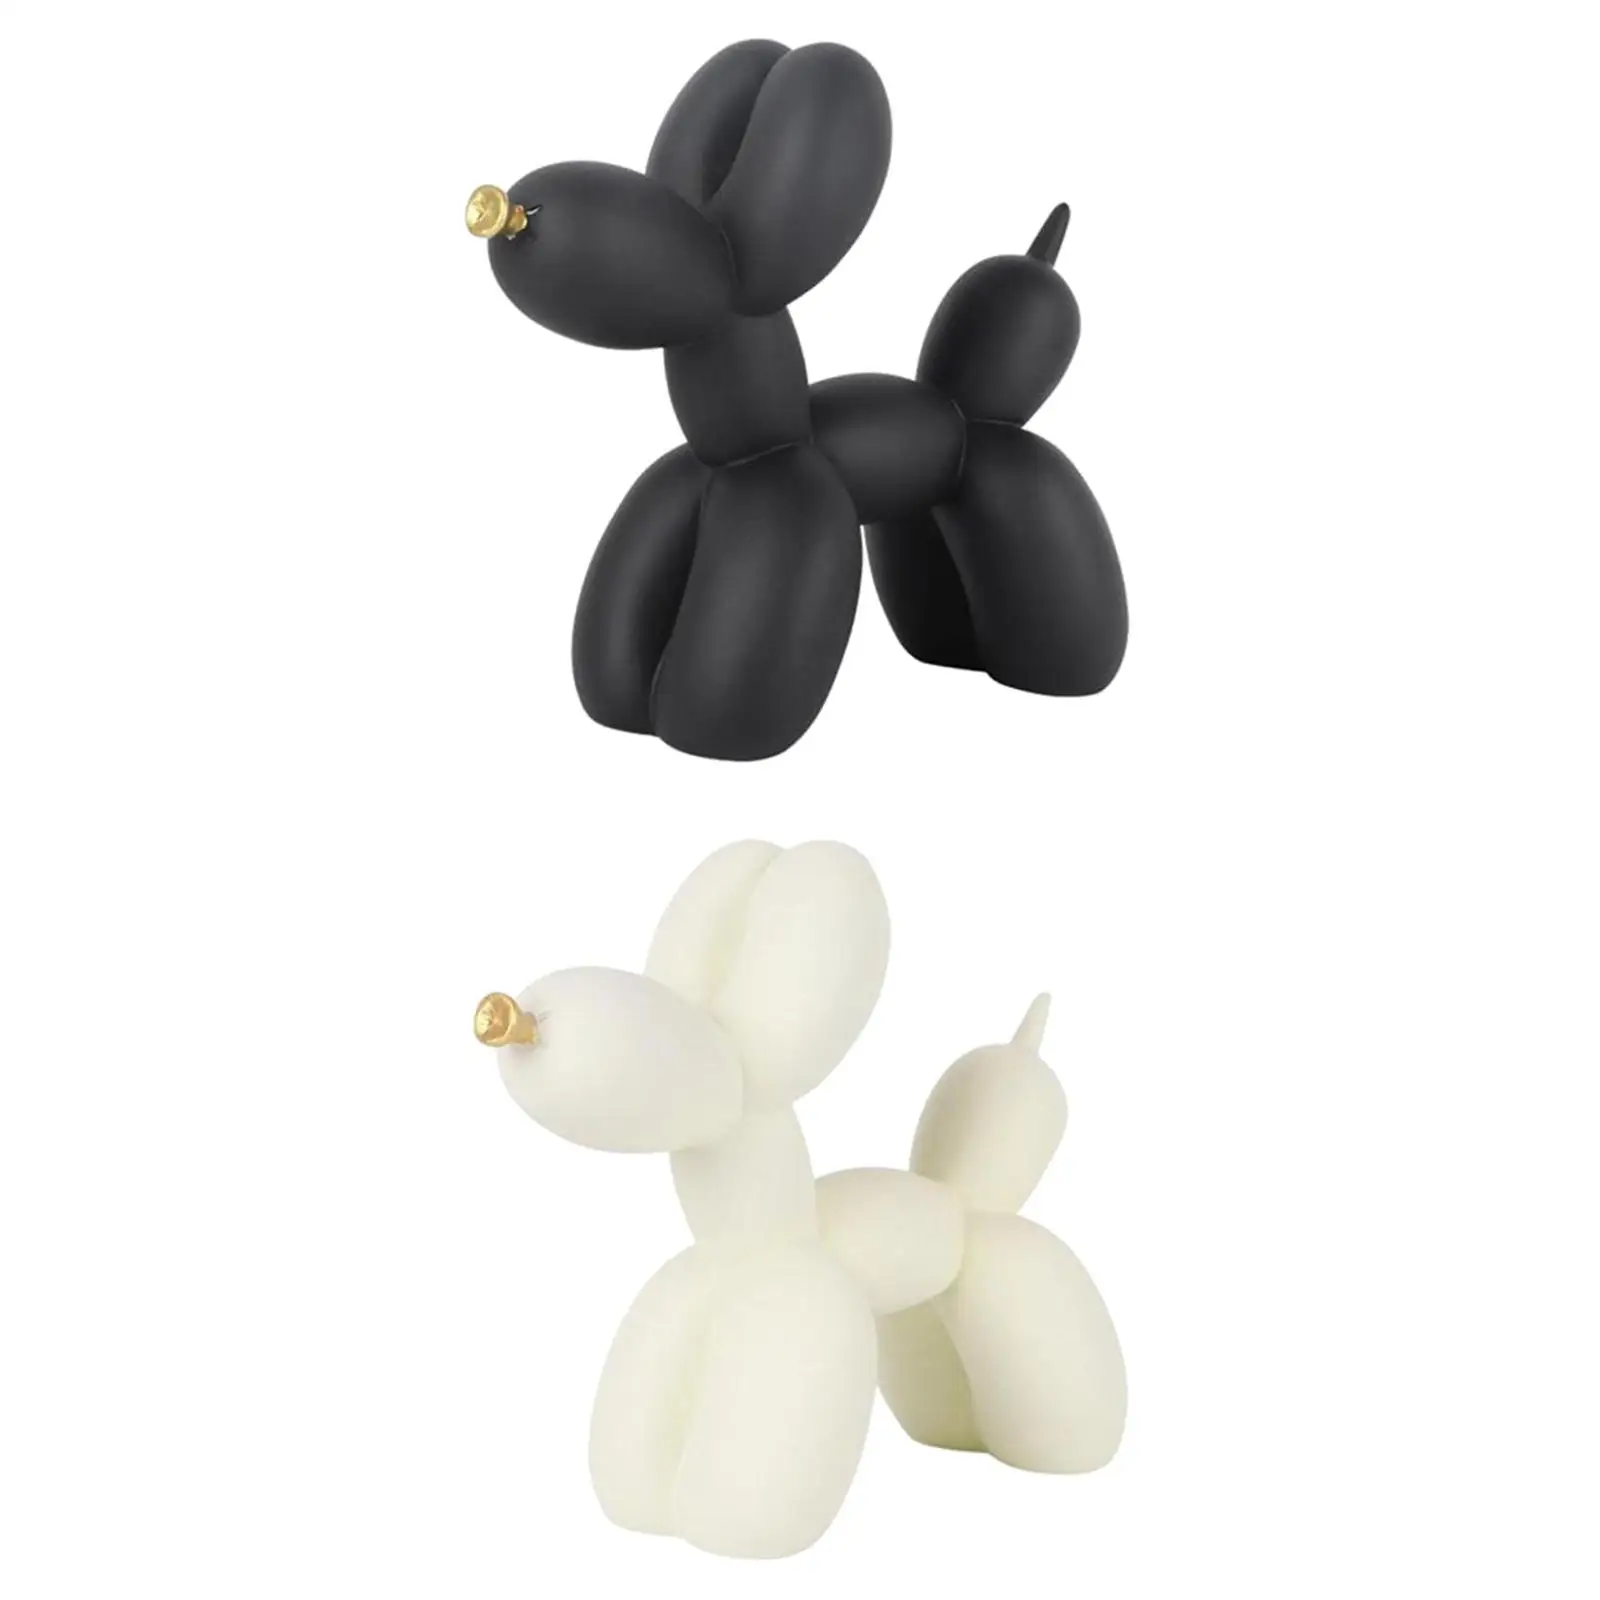 2x Balloon Dog Table Decor North European Style Family Ornament Home Decoration Party Photo Props